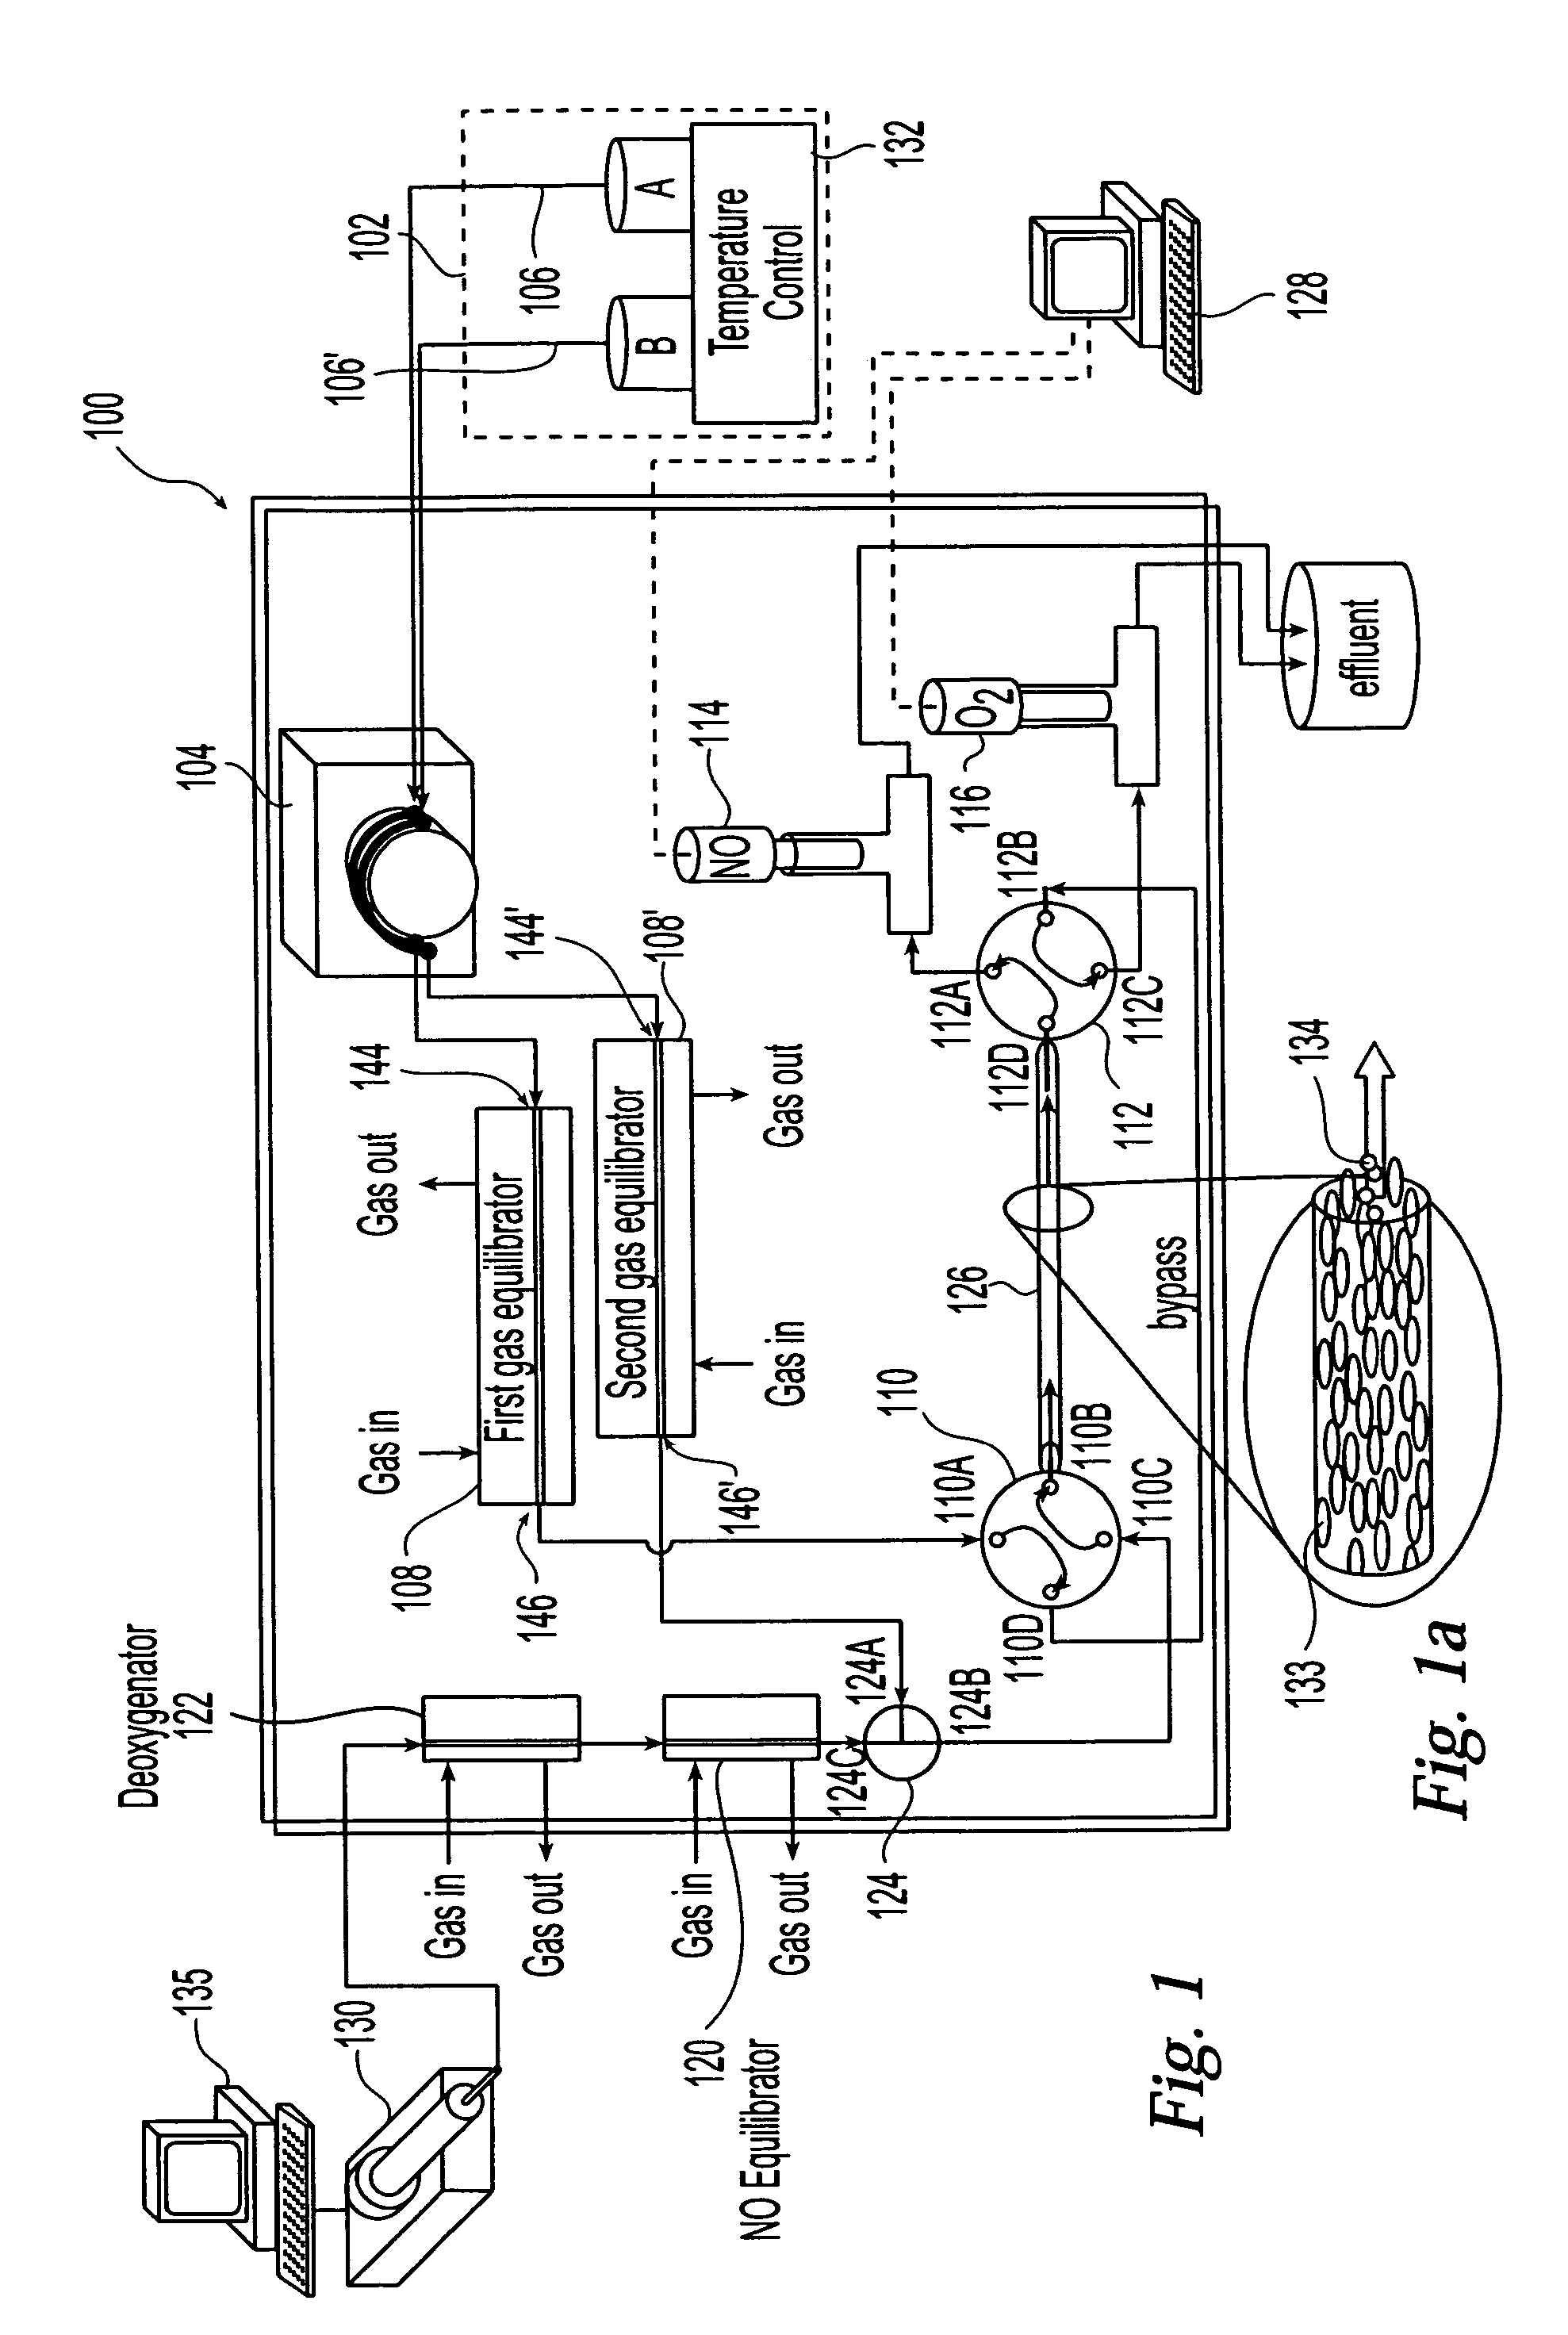 Method and apparatus for measuring nitric oxide production and oxygen consumption in cultures of adherent cells